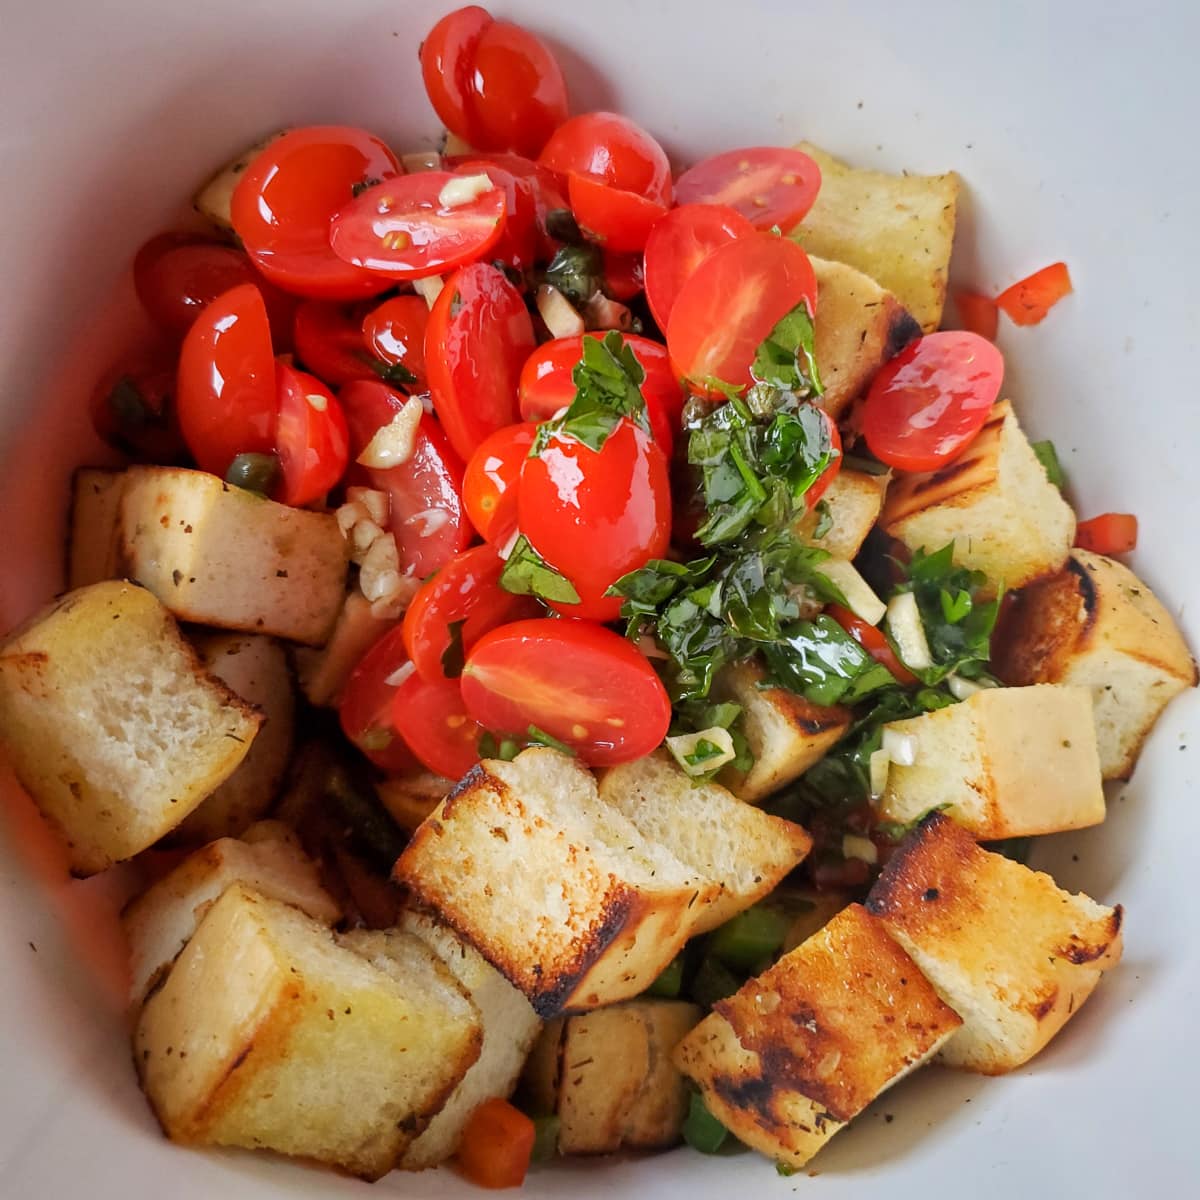 Mixing together the panzanella salad in a bowl.